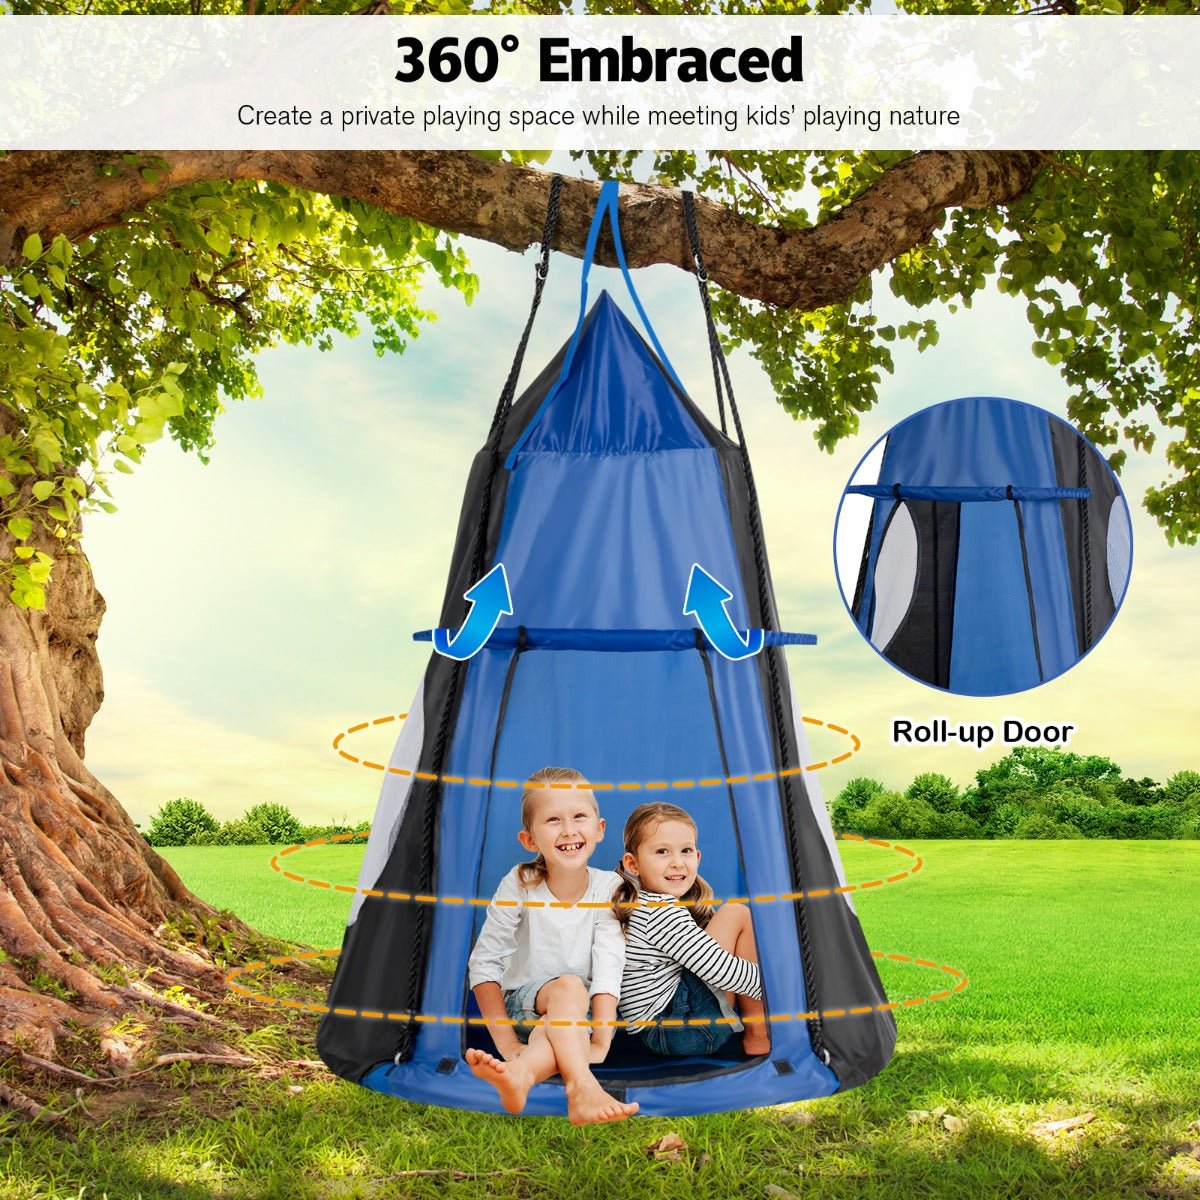 Outdoor Nest Hammock with Detachable Tent: Dual Fun for Kids